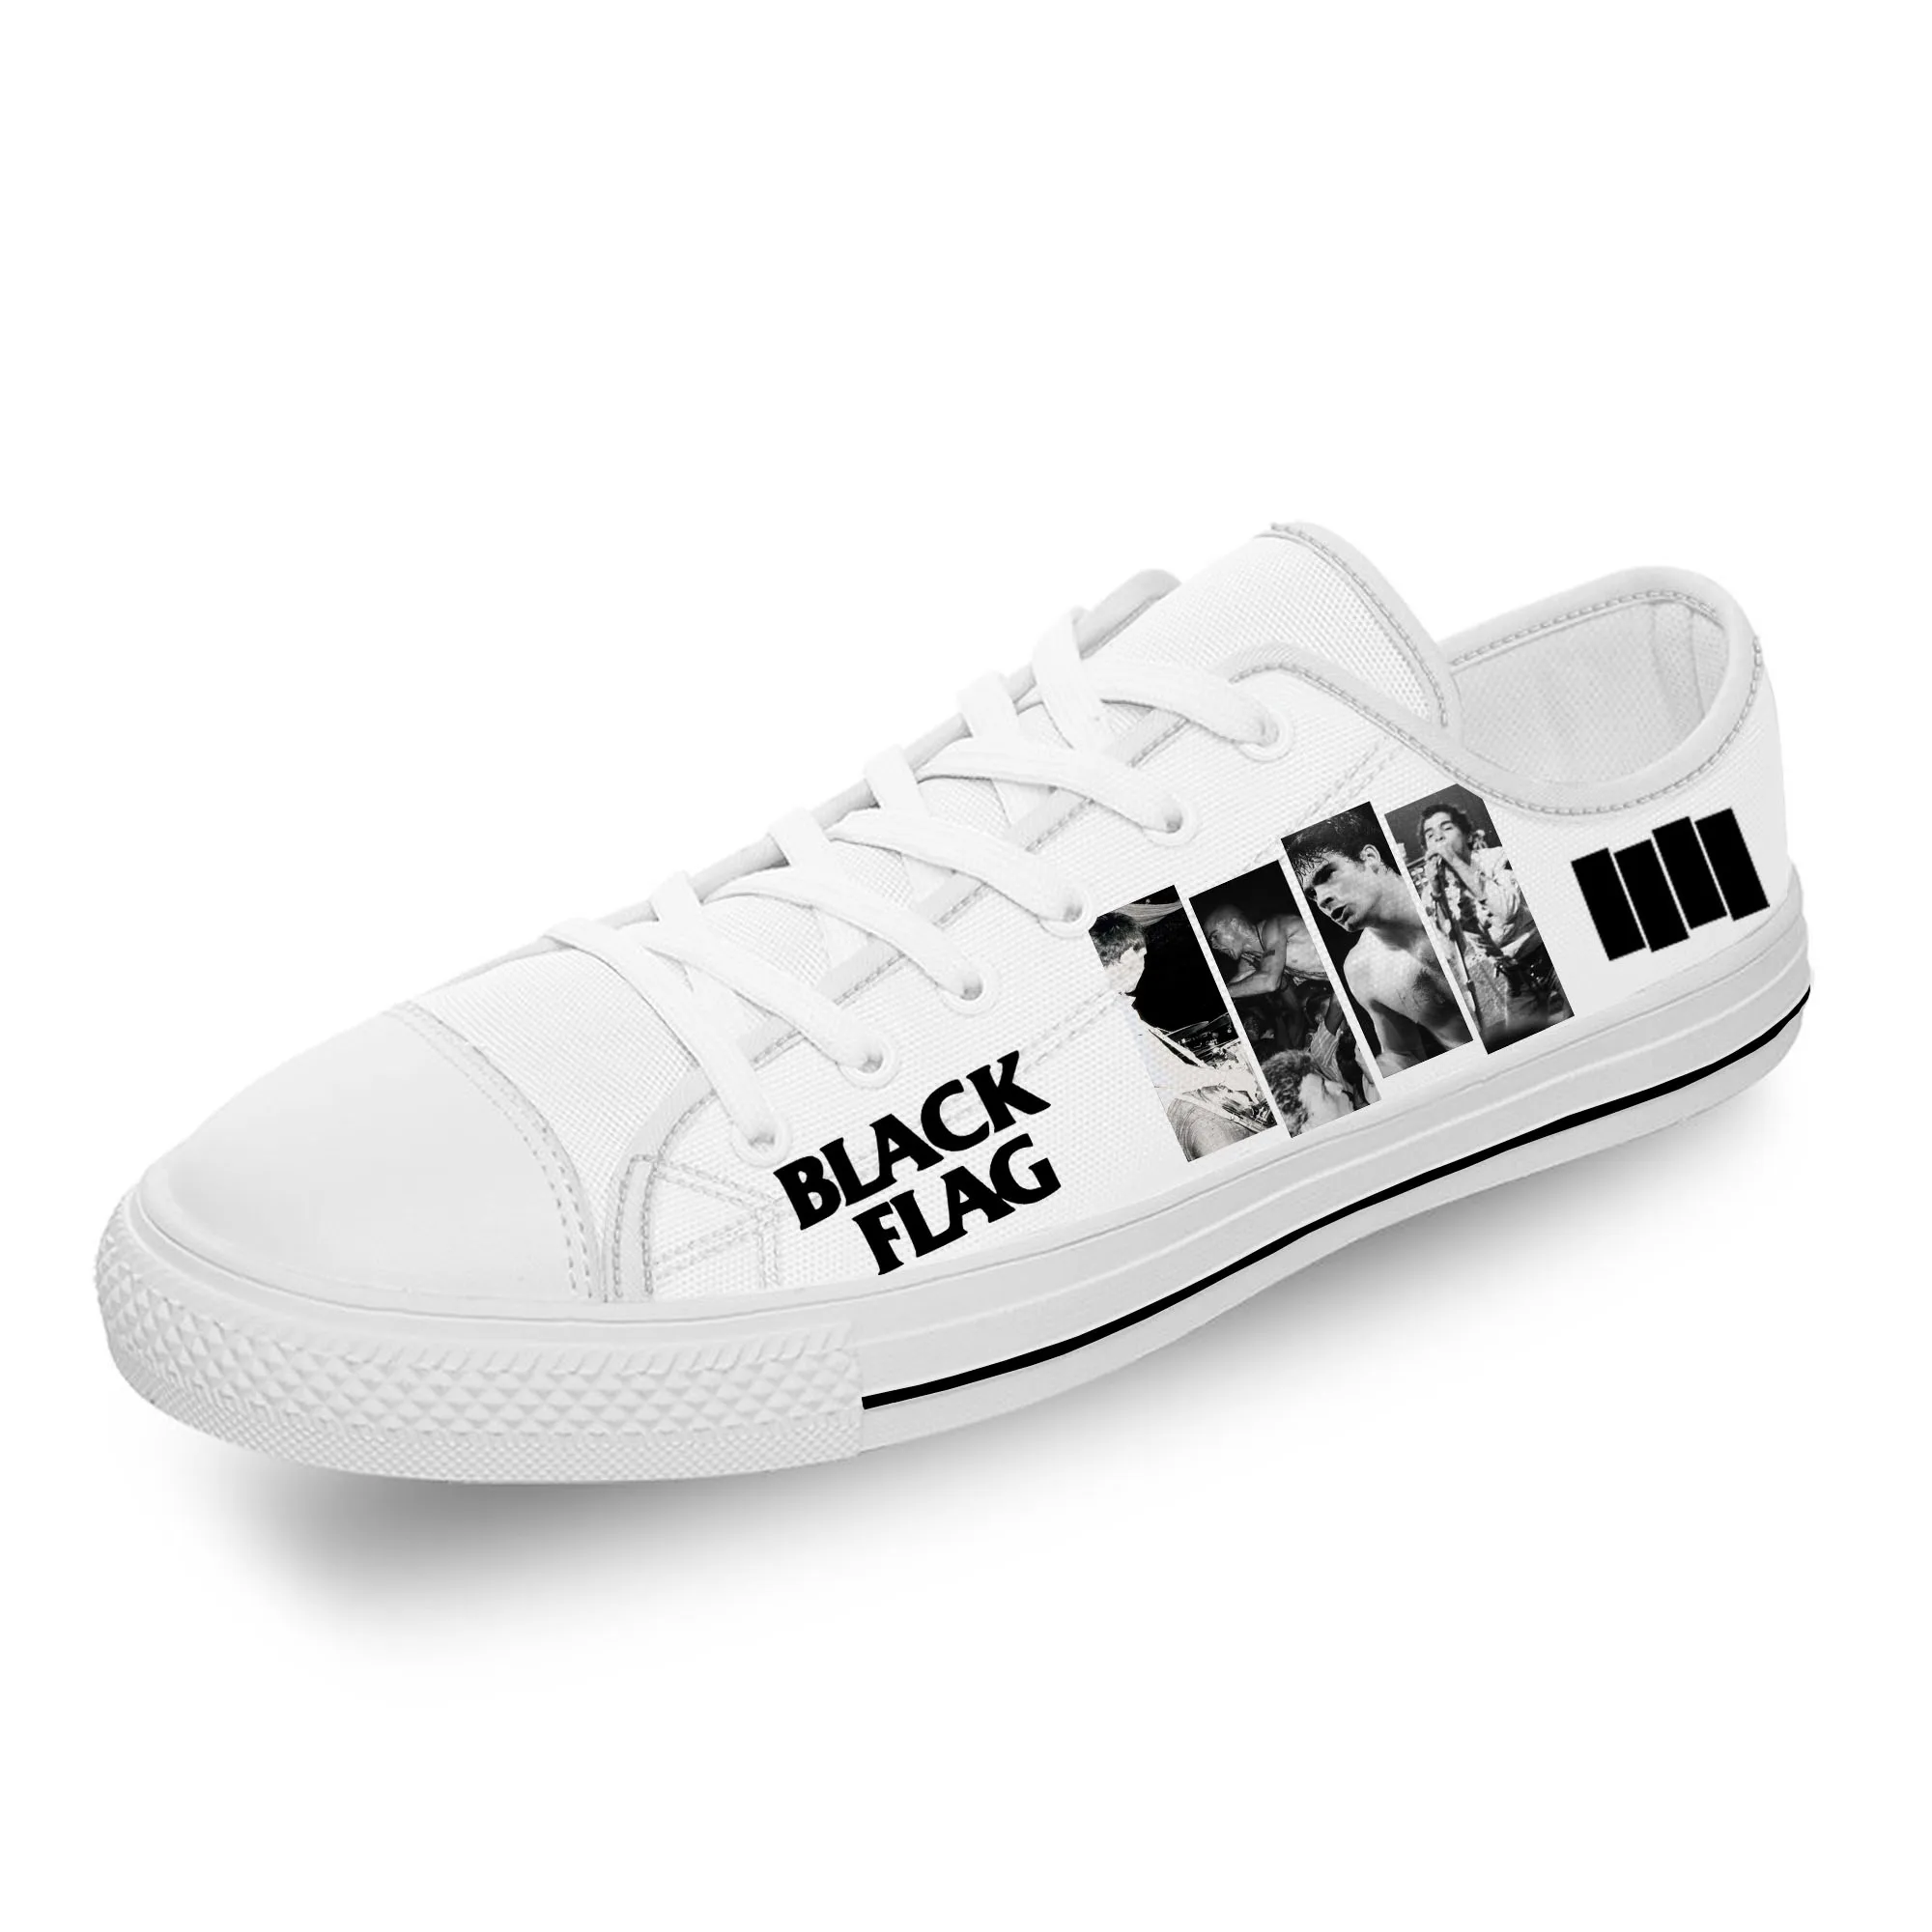 BLACK FLAG Rock Band Low Top Sneakers Mens Womens Teenager Casual Shoes Canvas Running Shoes 3D Print Designer Lightweight shoe cheap wholesale mens reacts running element 55 black red white grey womens shoes 87 low sports sneakers trainners size 36 45